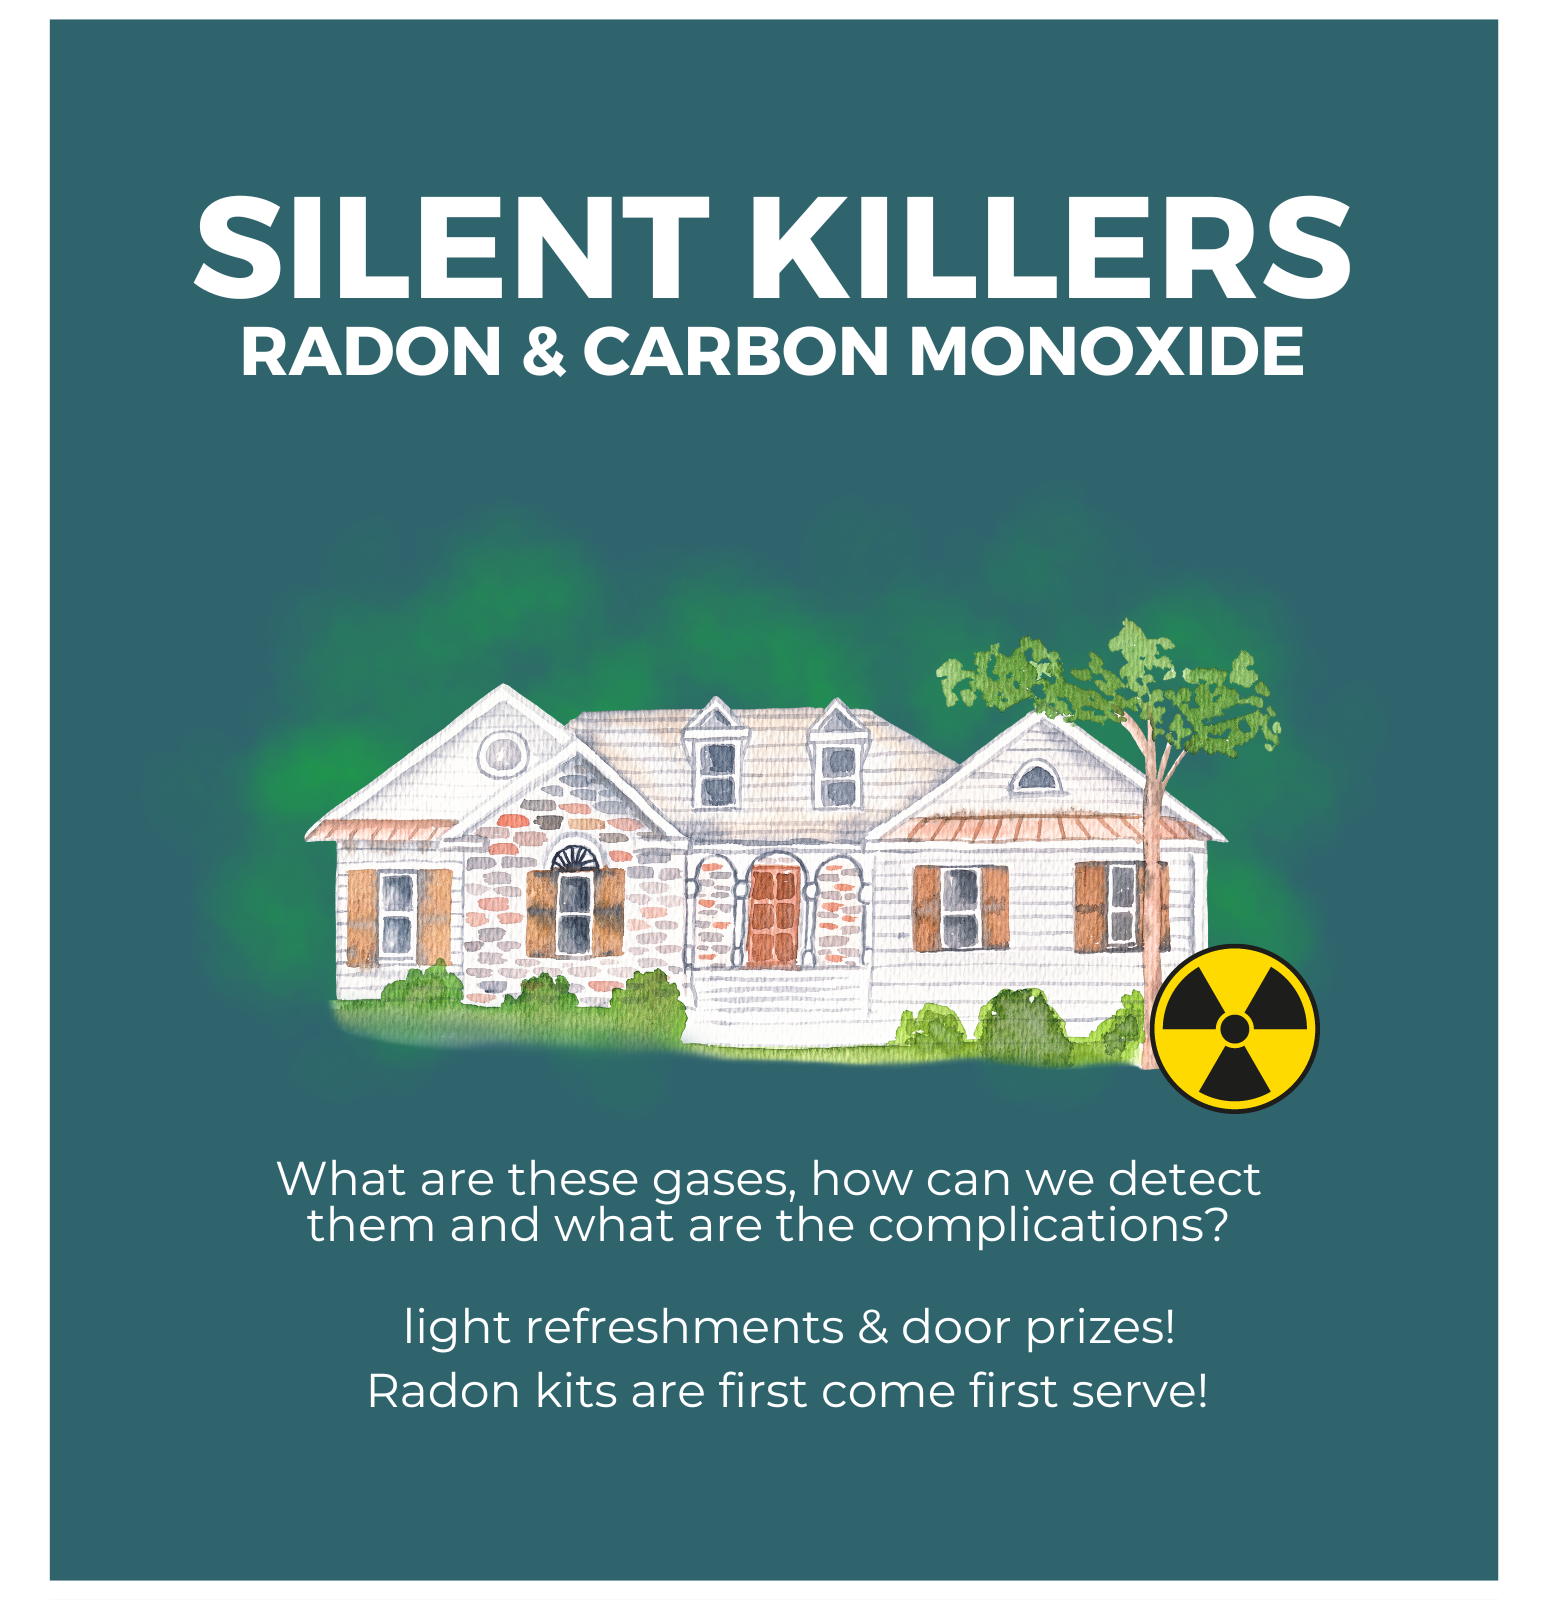 radon and carbon monoxide with house